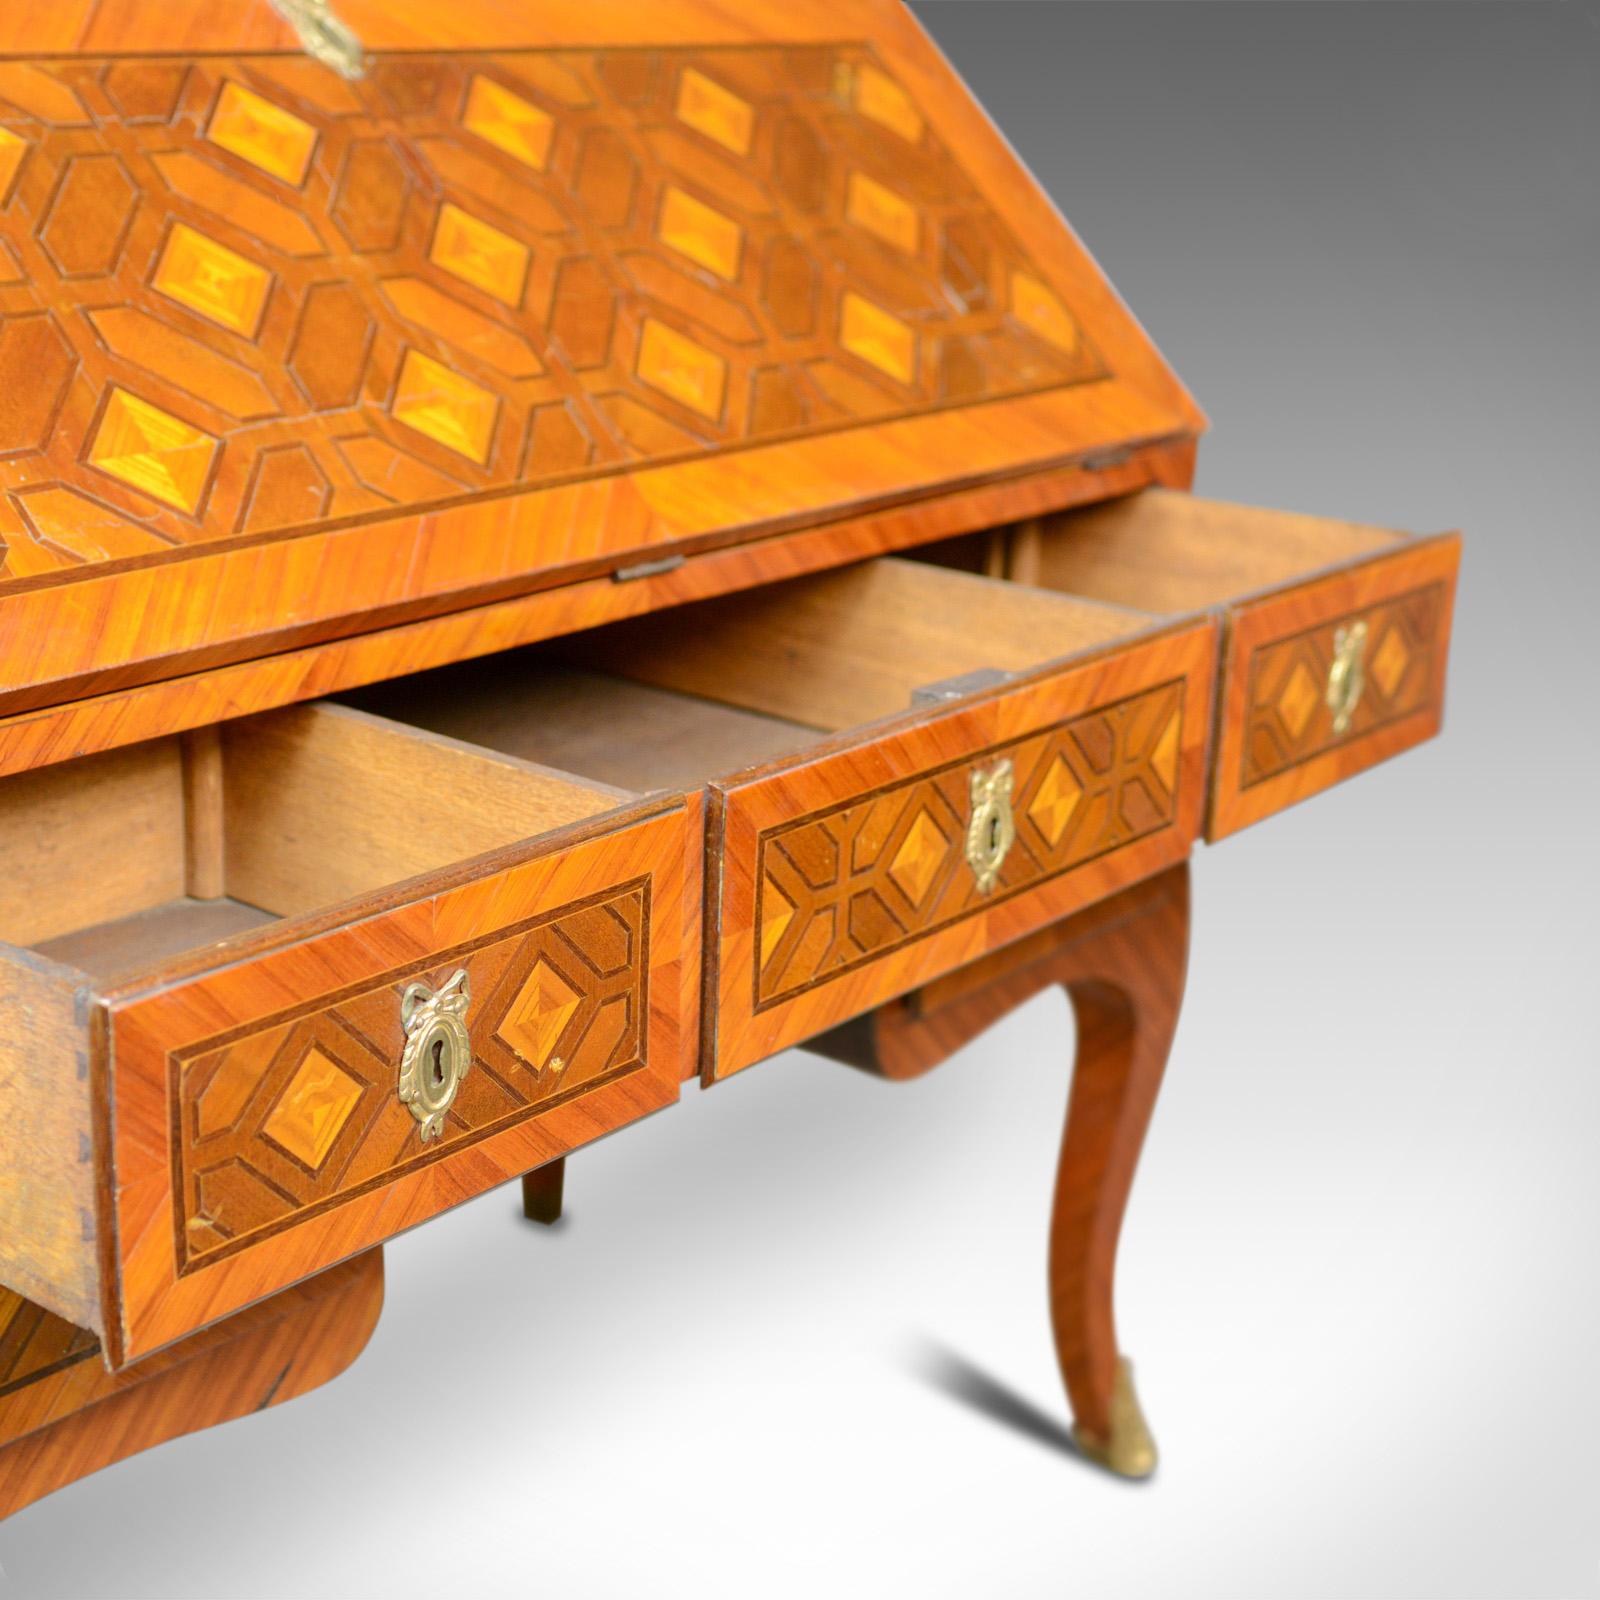 Antique Bureau, French, Marble Top, Kingwood, Marquetry Desk, circa 1900 For Sale 3